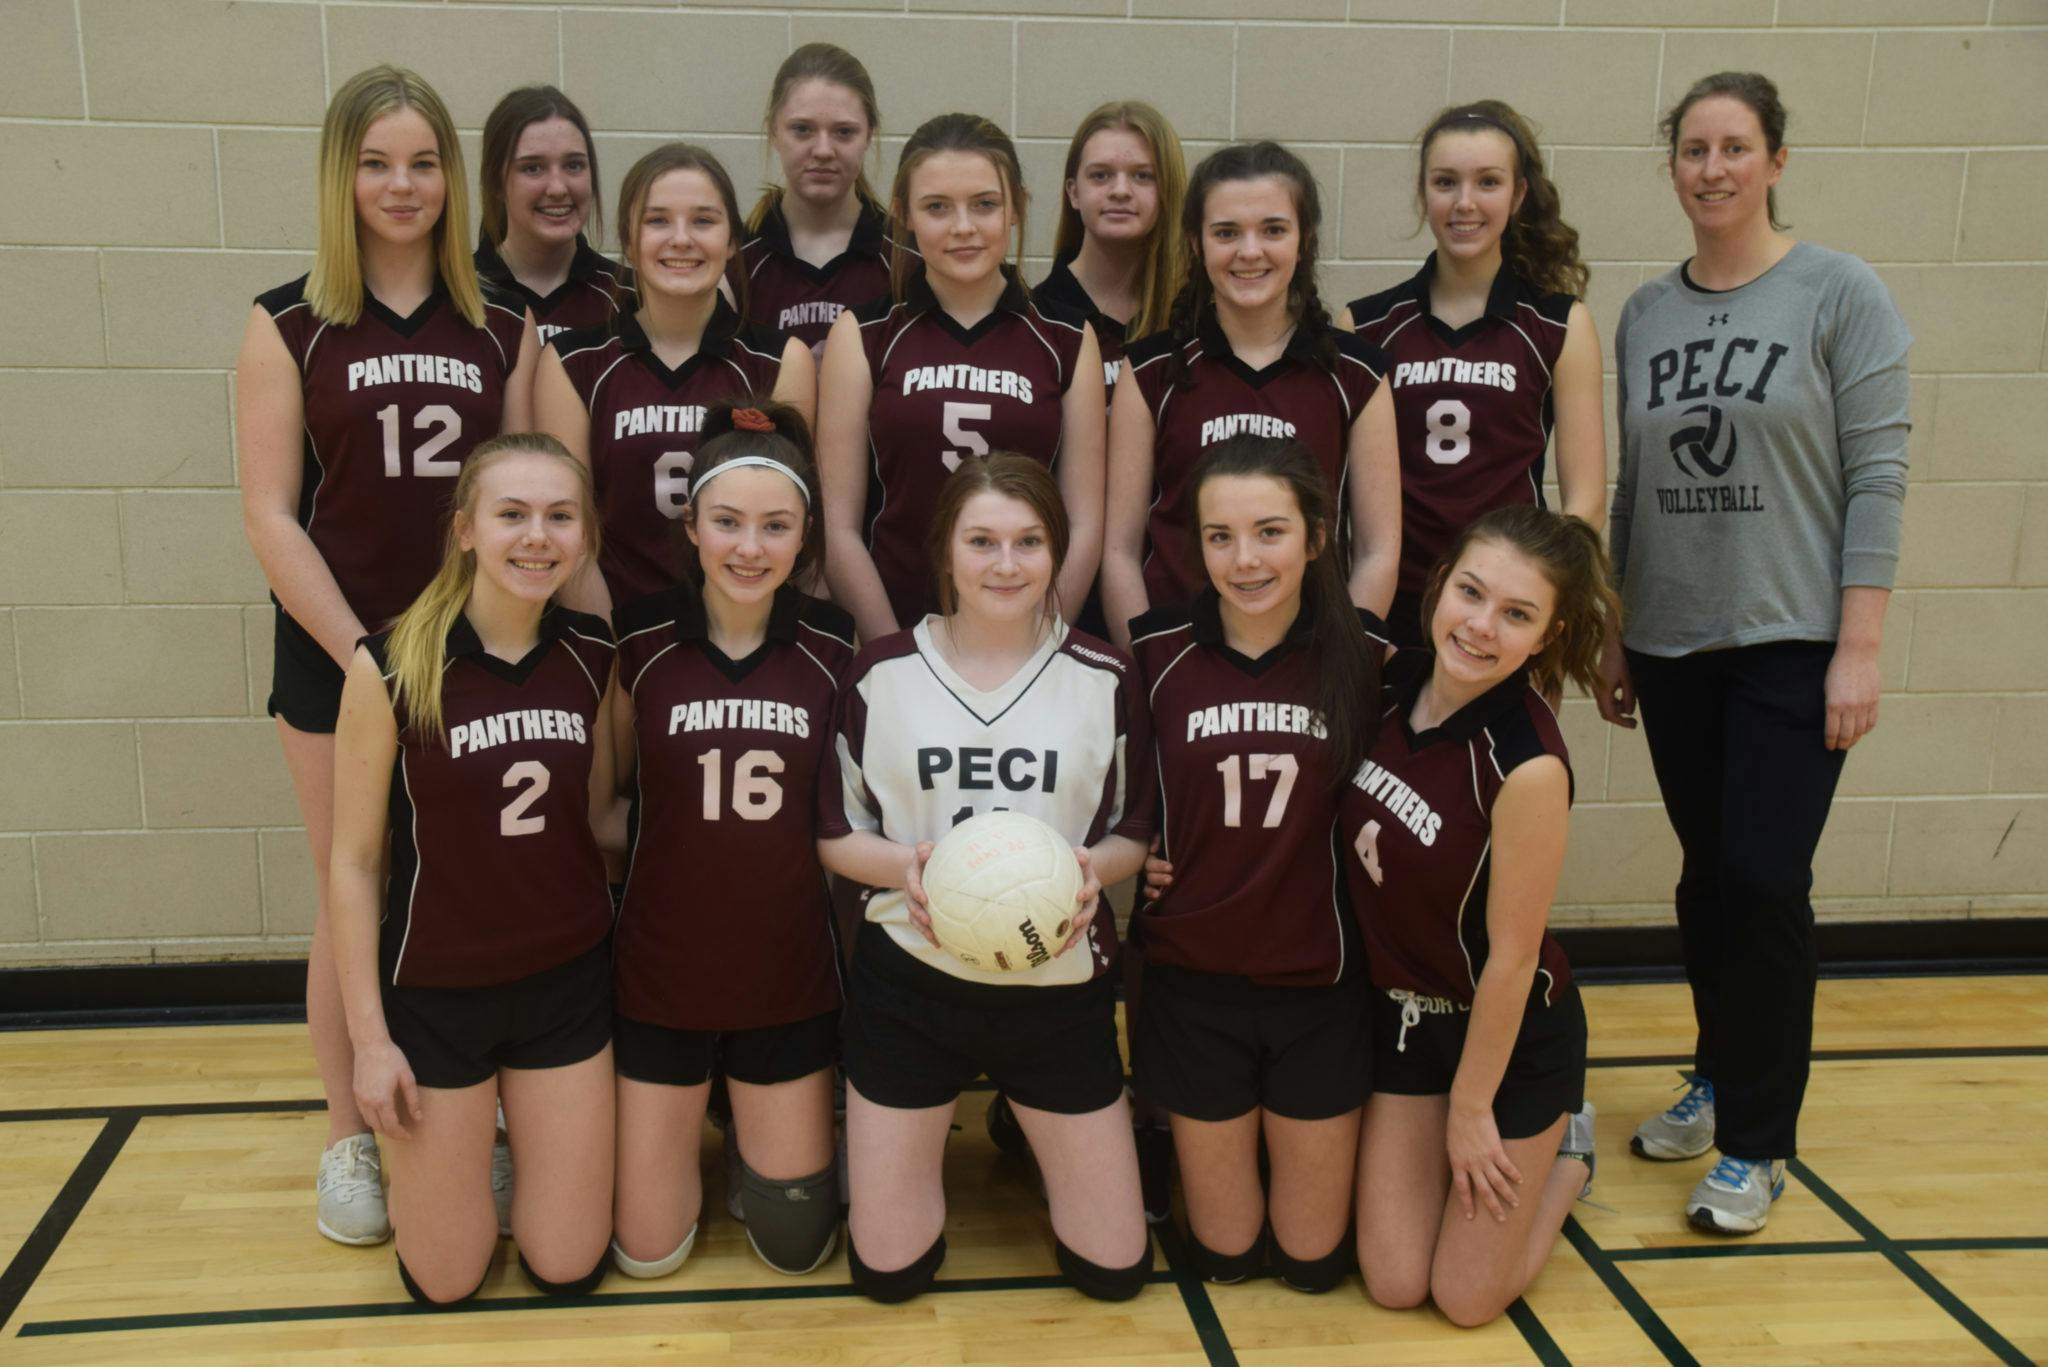 <p>Bronzed &#8211; The PECI Junior Volleyball Panthers took third place at the COSSA touranment Friday. In front, from left, are Vanessa Wilton, Kaitlyn McConkey, Erica Monroe, Lauren Smith, and Jolie Elliott. In the back row, from left, are  Taylor Squire, Abby Conley, Hannah Goad, Leah Armstrong, Ava Struthers,  Mercedes Crowe, Emily Stasiw, Gracie Burris and coach Sarah Vader. (Adam Bramburger/Gazette staff)</p>
